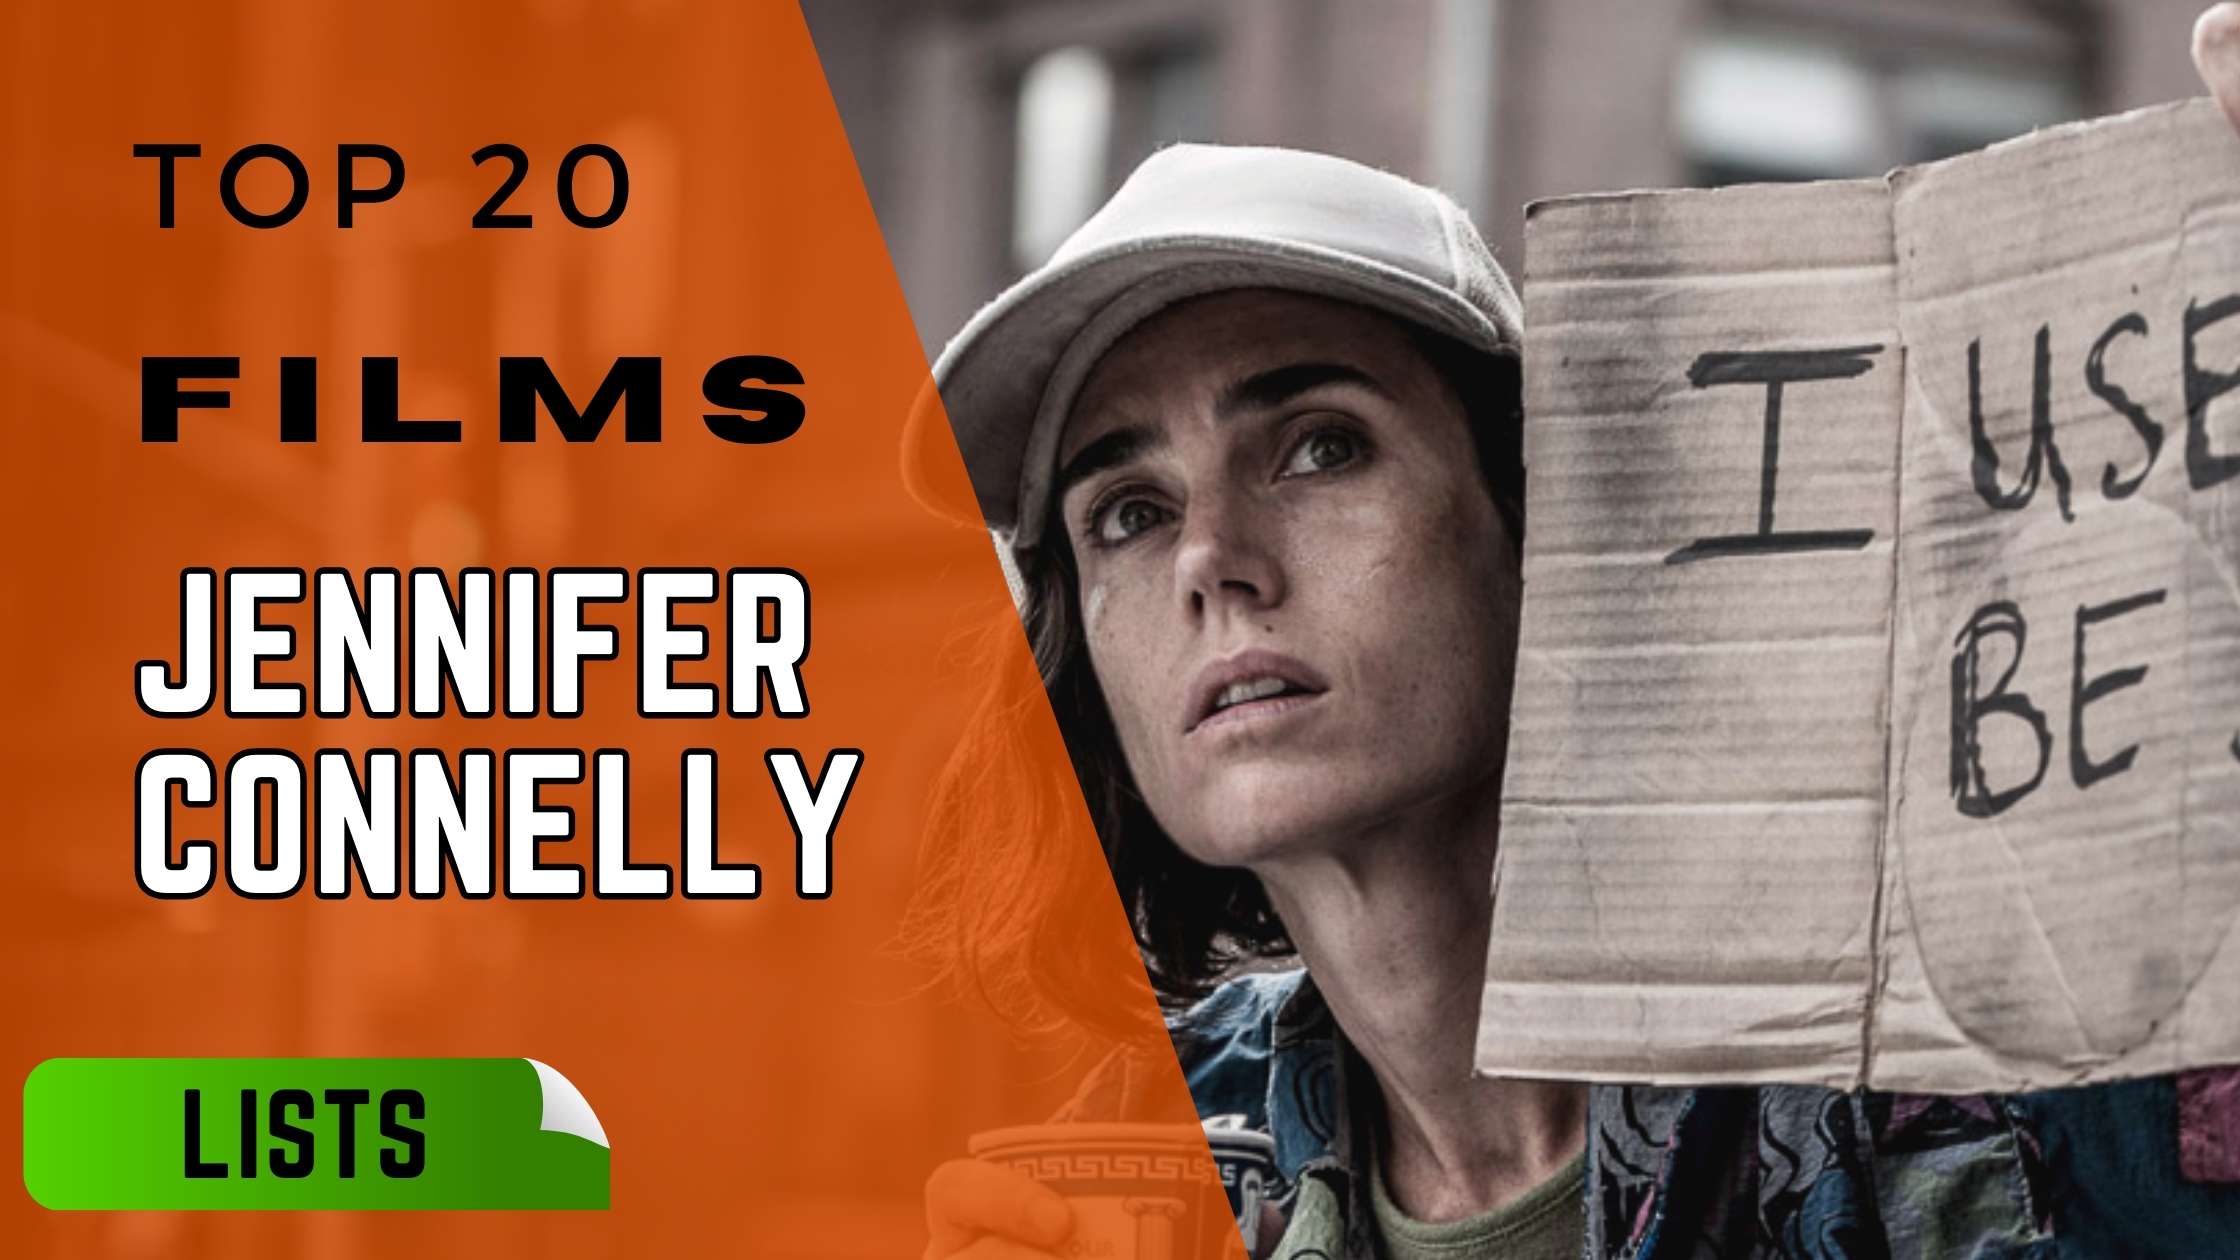 Jennifer Connelly's 10 Best Movies, According to Ranker